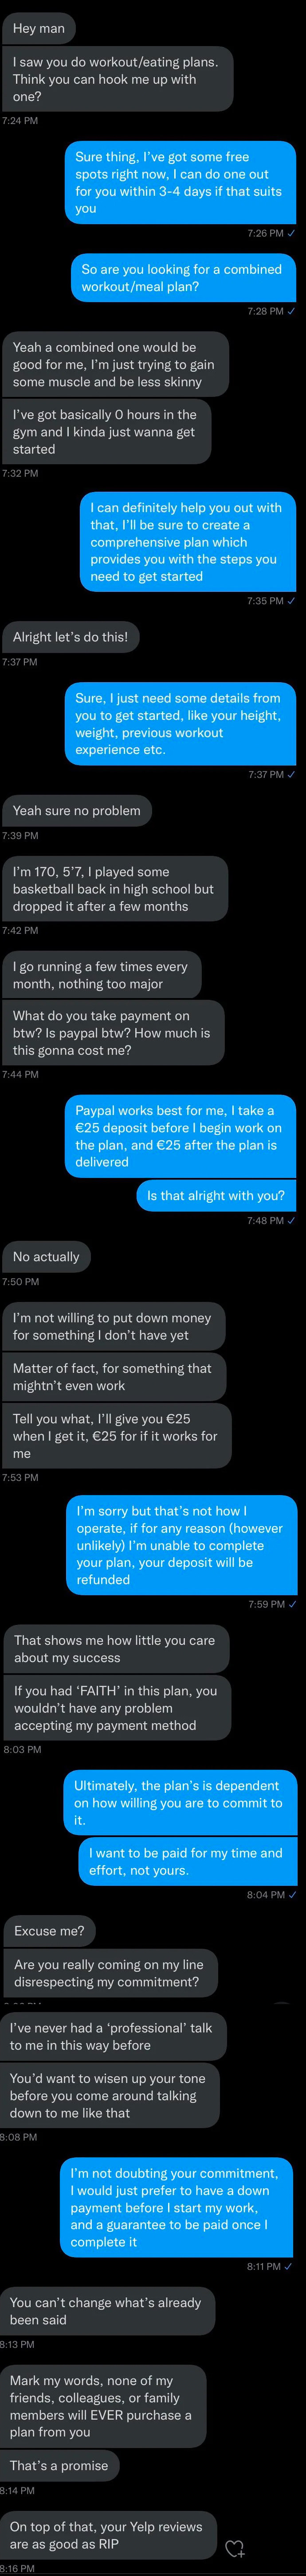 Text exchange ending with, &quot;Mark my words, none of my friends, colleagues, or family members will EVER purchase a plan from you. That&#x27;s a promise. On top of that, your Yelp reviews are as good as RIP.&quot;